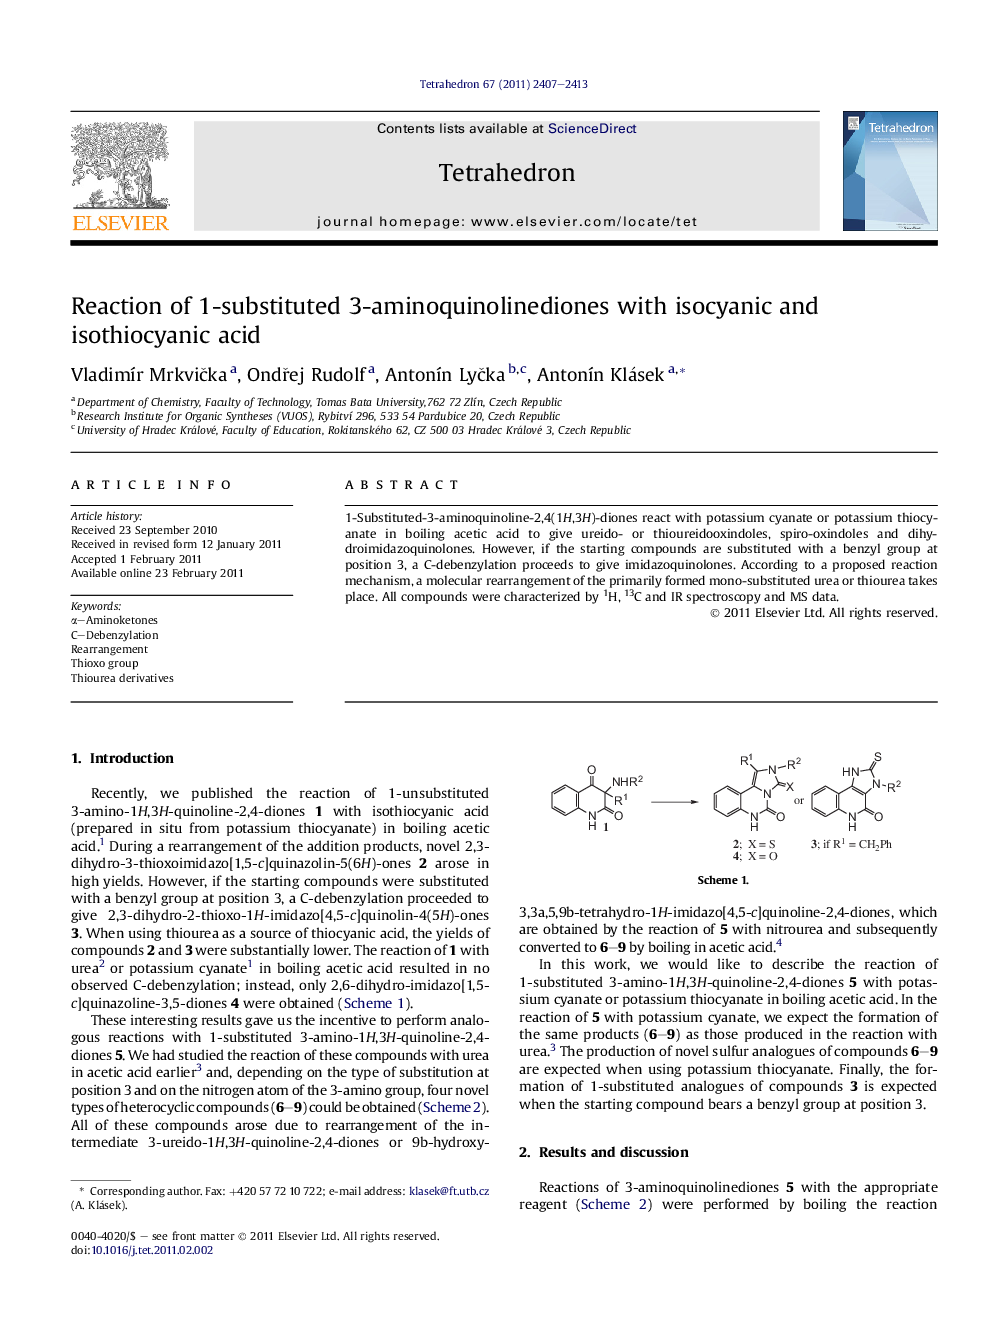 Reaction of 1-substituted 3-aminoquinolinediones with isocyanic and isothiocyanic acid